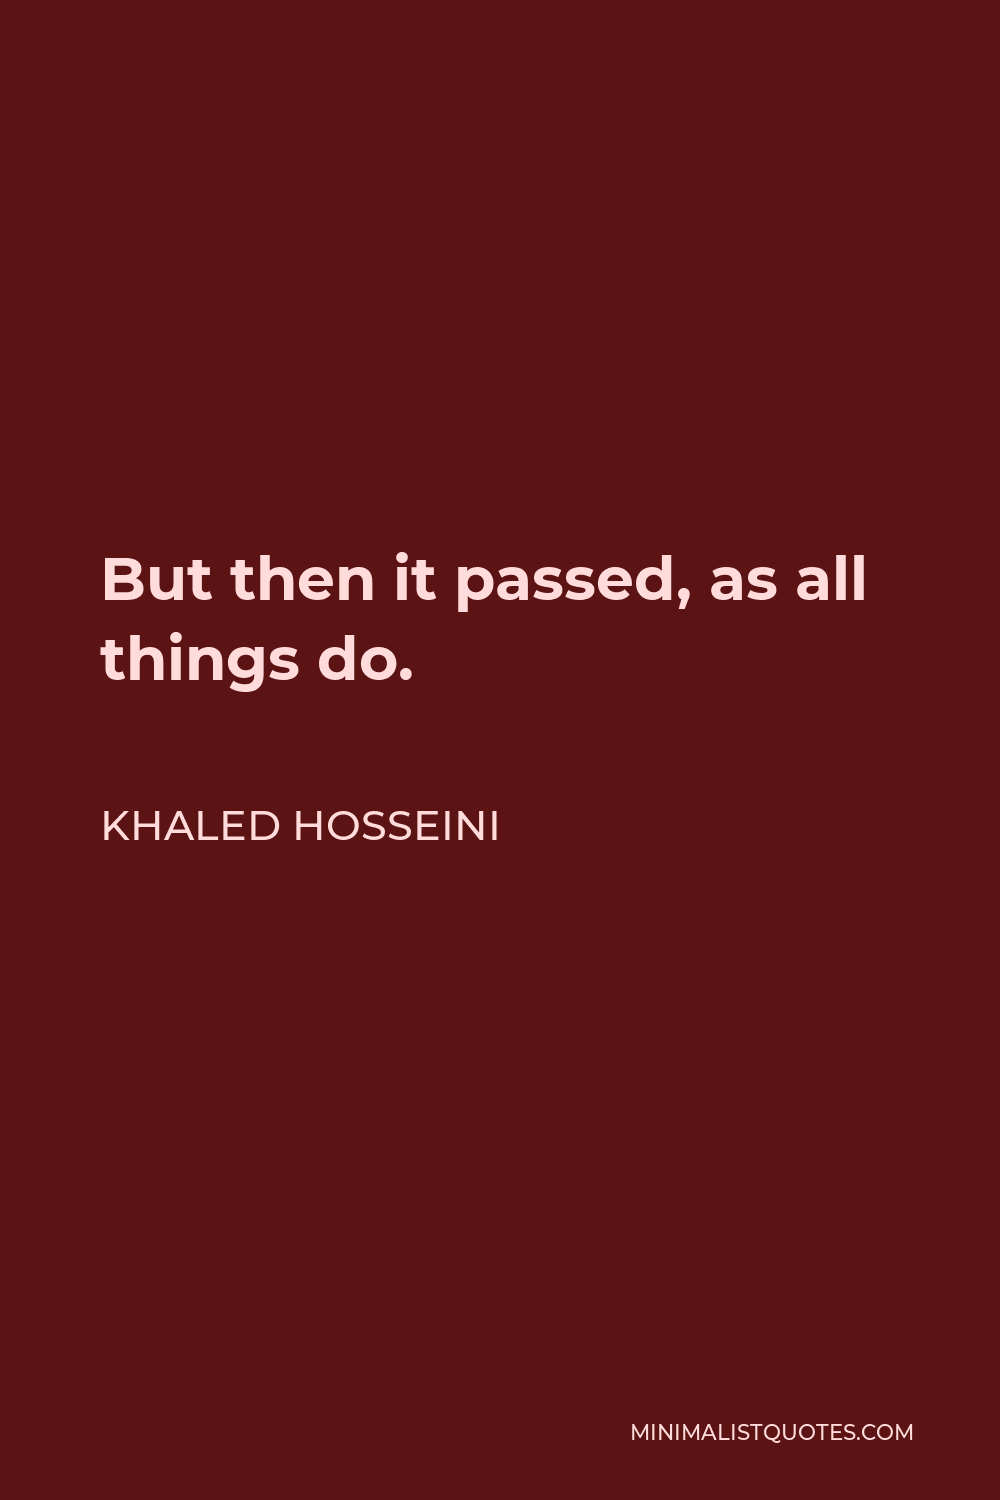 Khaled Hosseini Quote - But then it passed, as all things do.